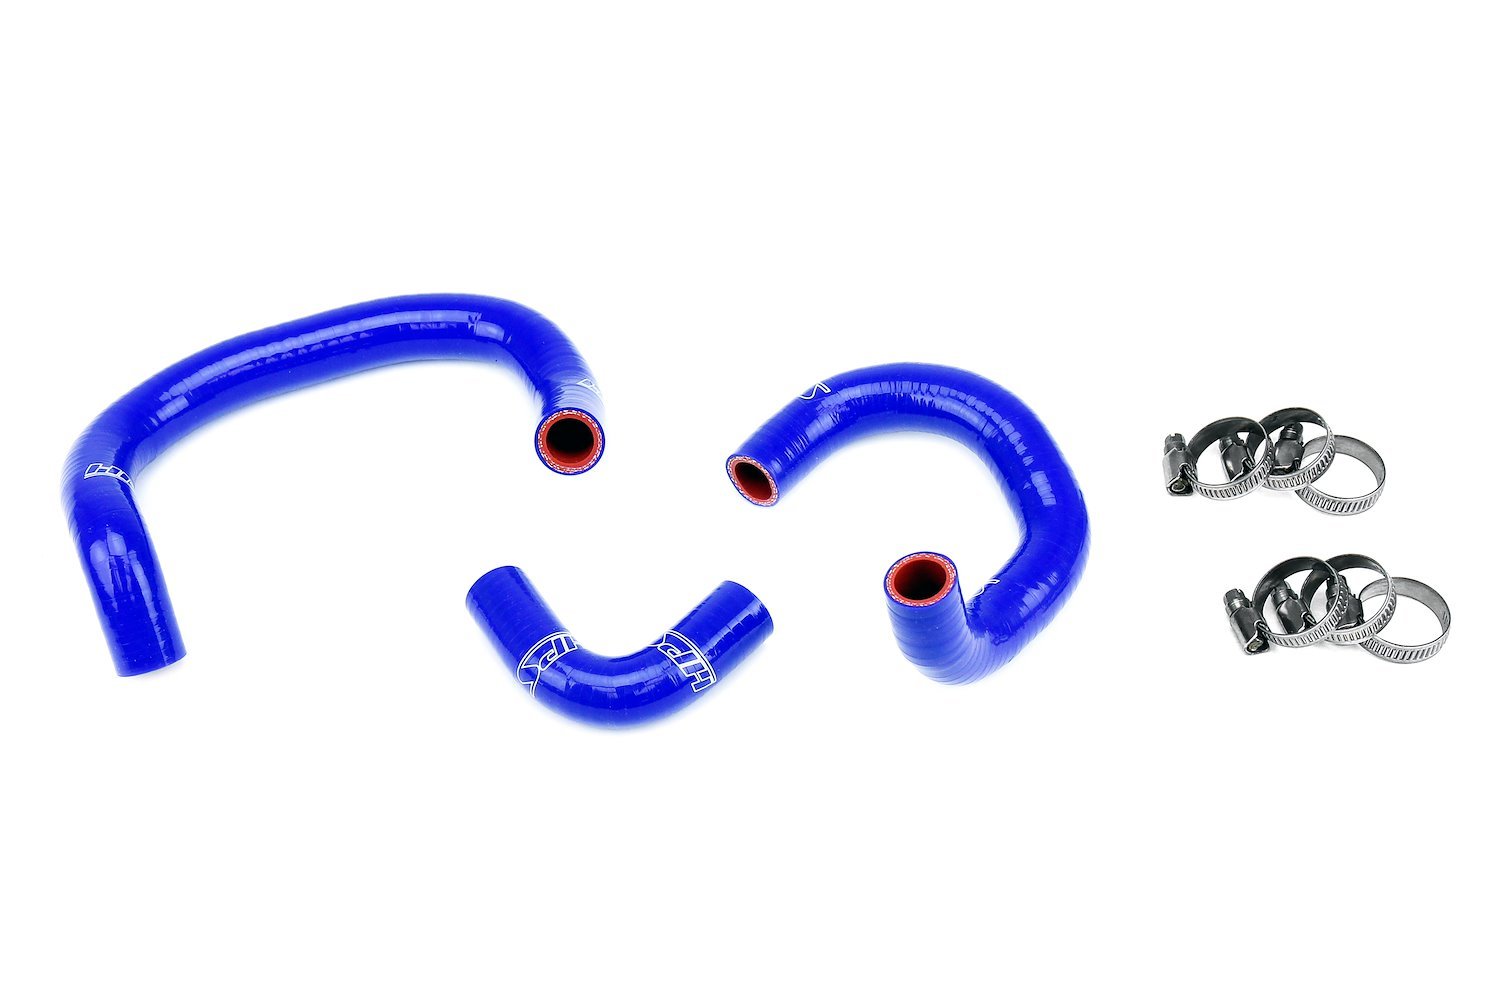 57-1927-BLUE Heater Hose Kit, 3-Ply Reinforced Silicone, Replaces OEM Rubber Heater Coolant Hoses